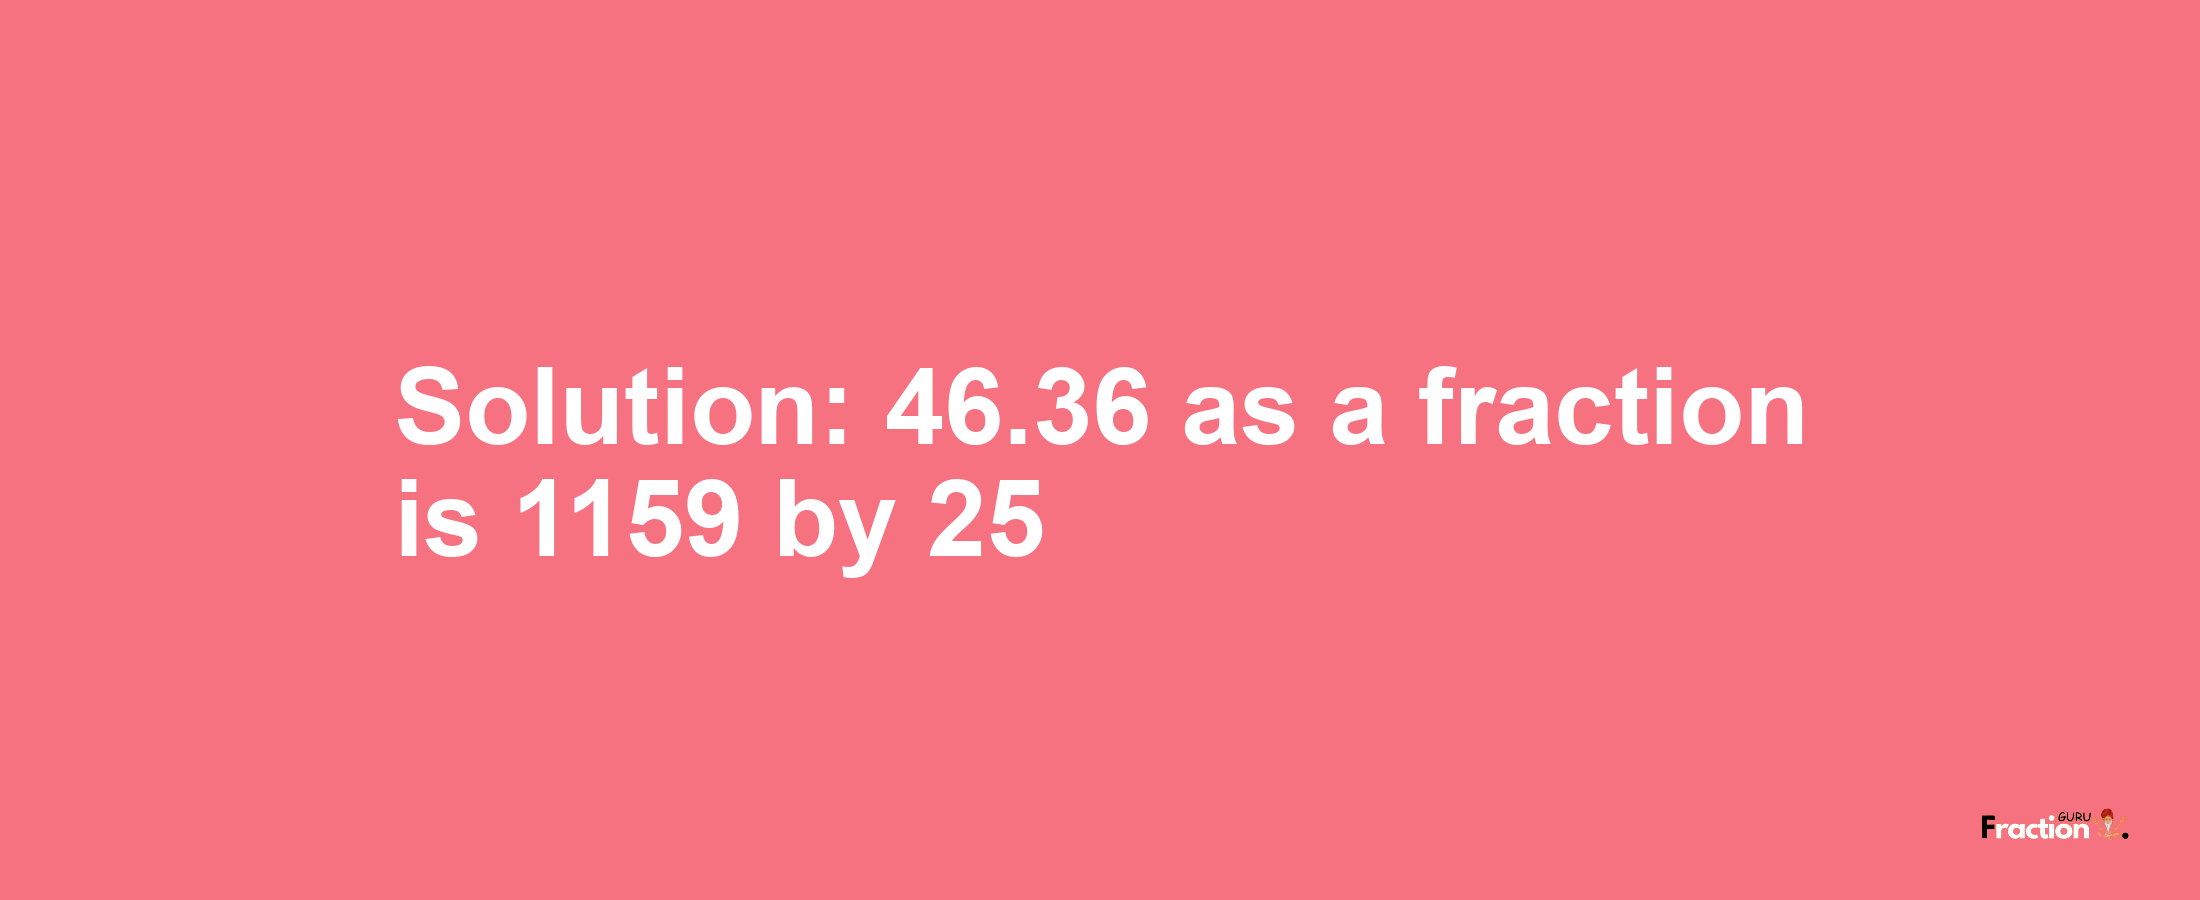 Solution:46.36 as a fraction is 1159/25